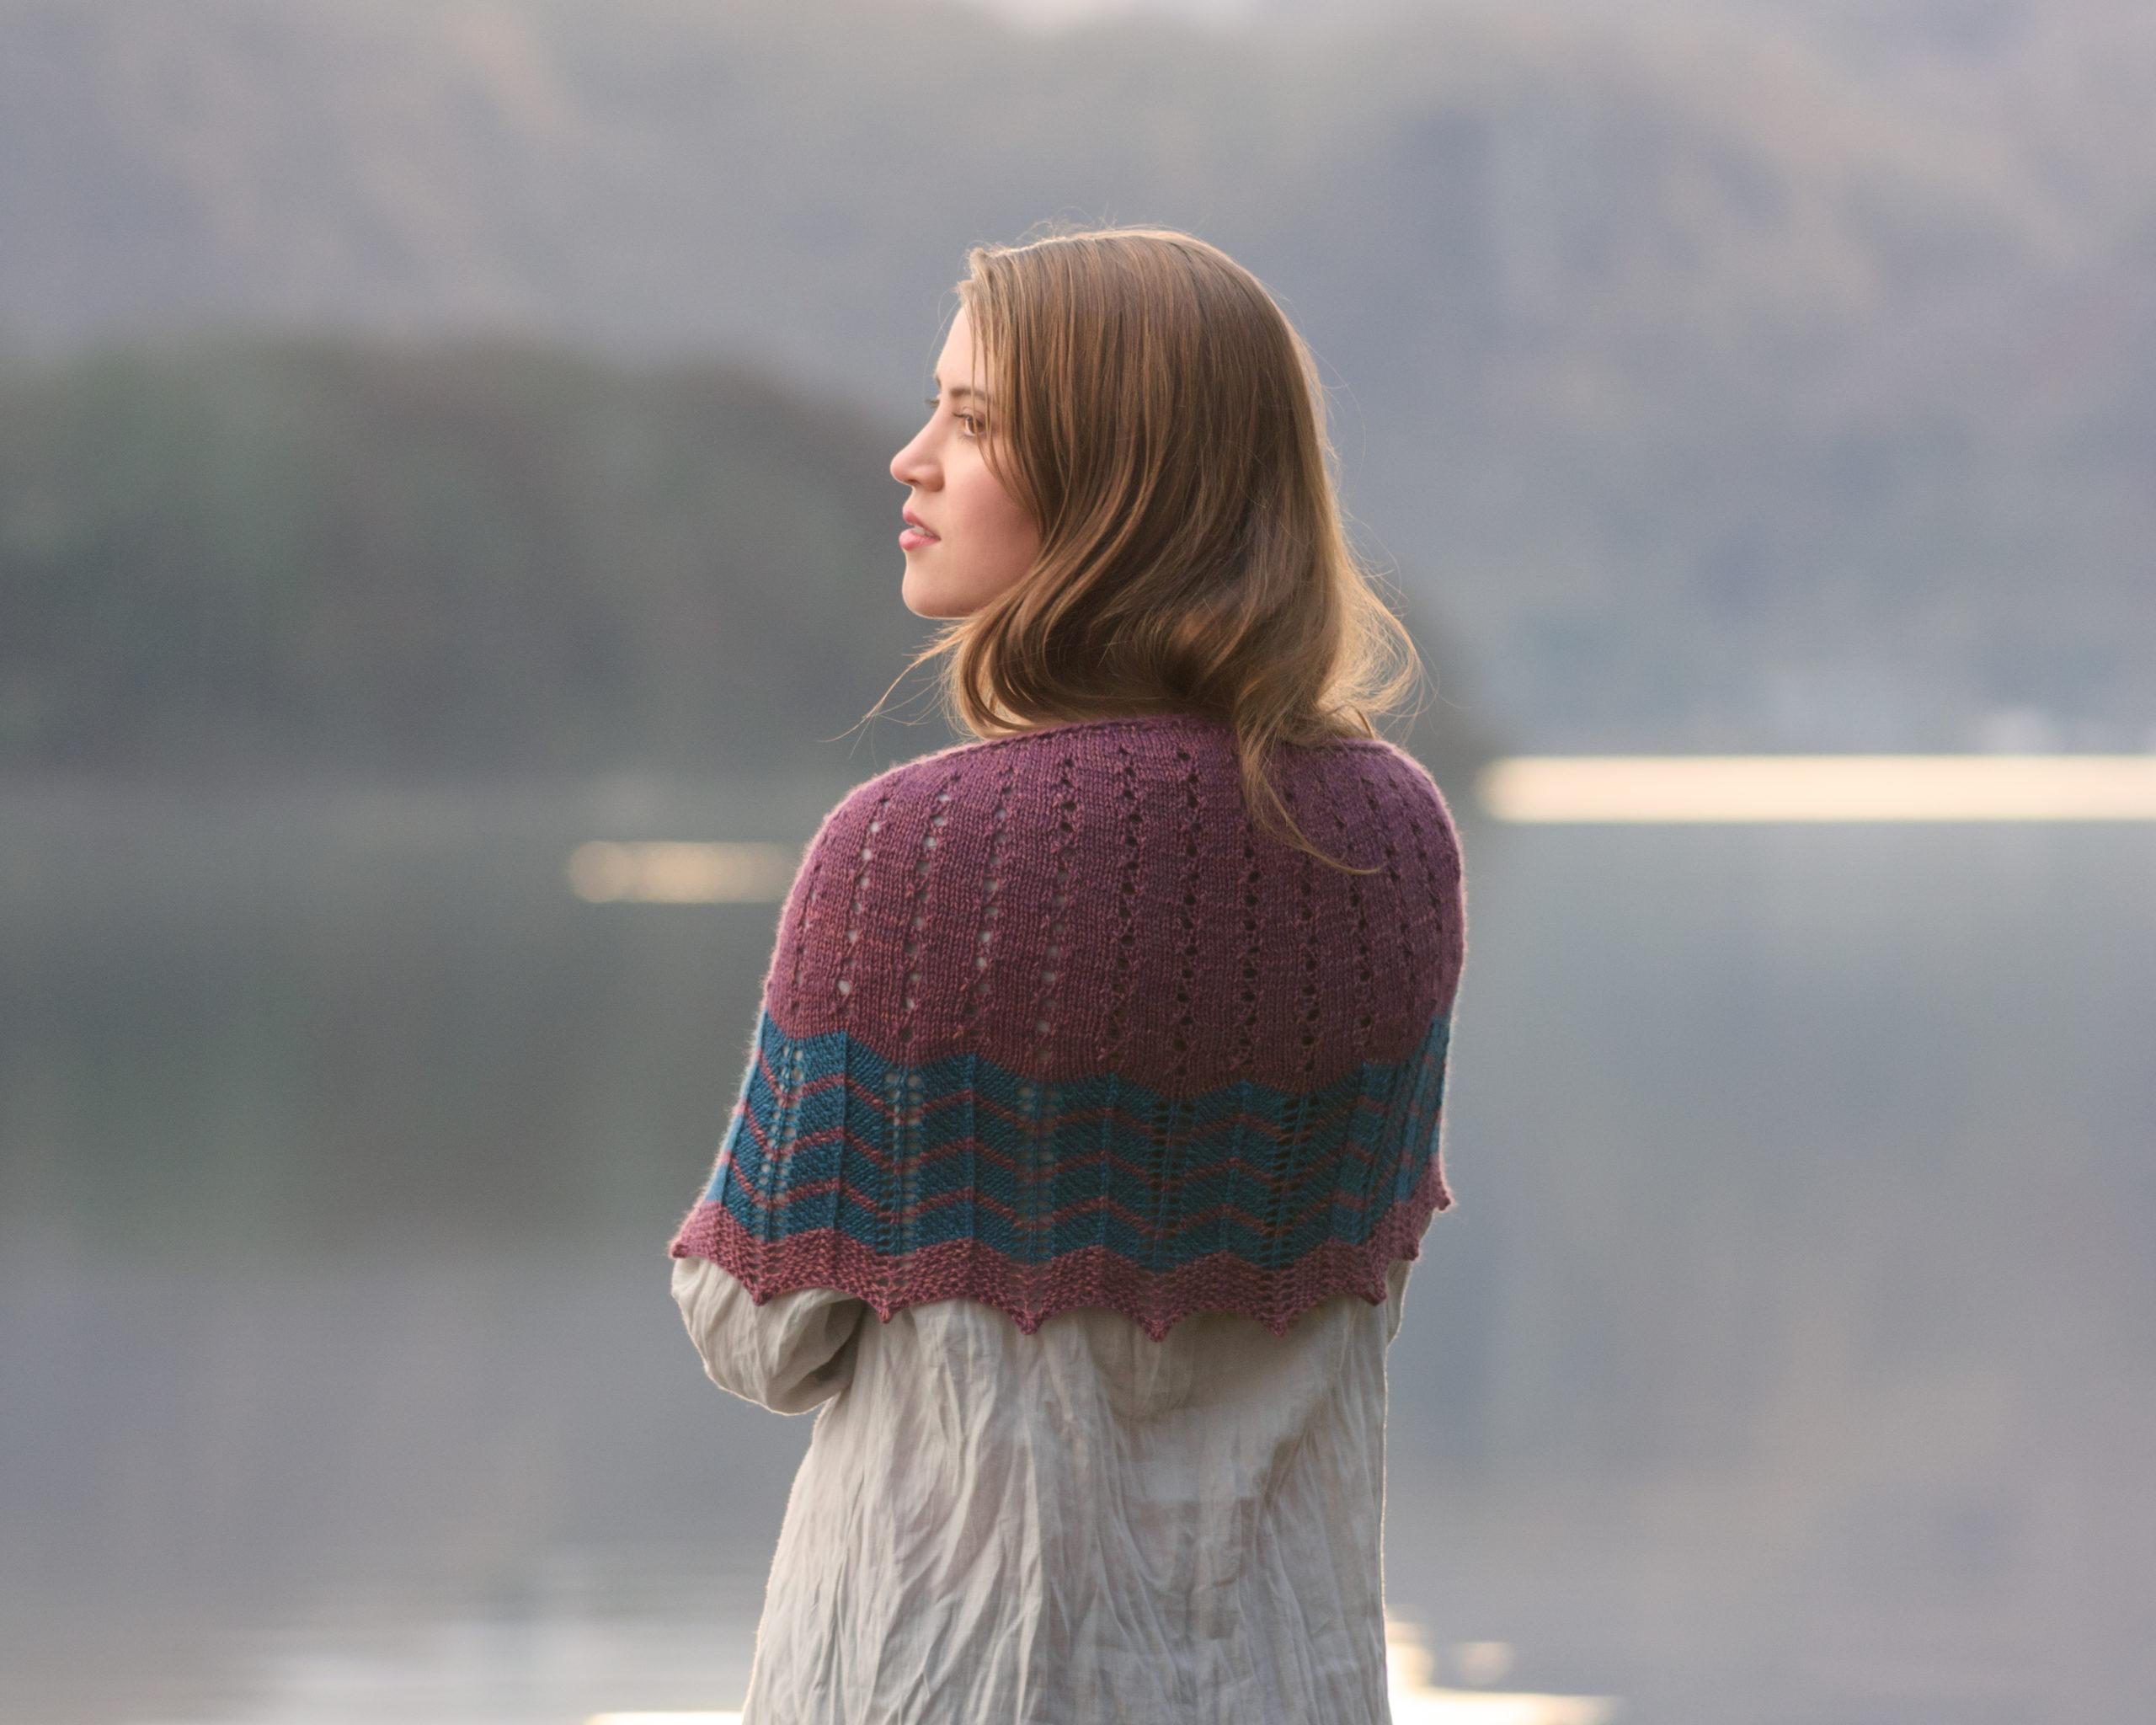 Back of the Tobermory Shawl designed by Helen Stewart of Curious Handmade